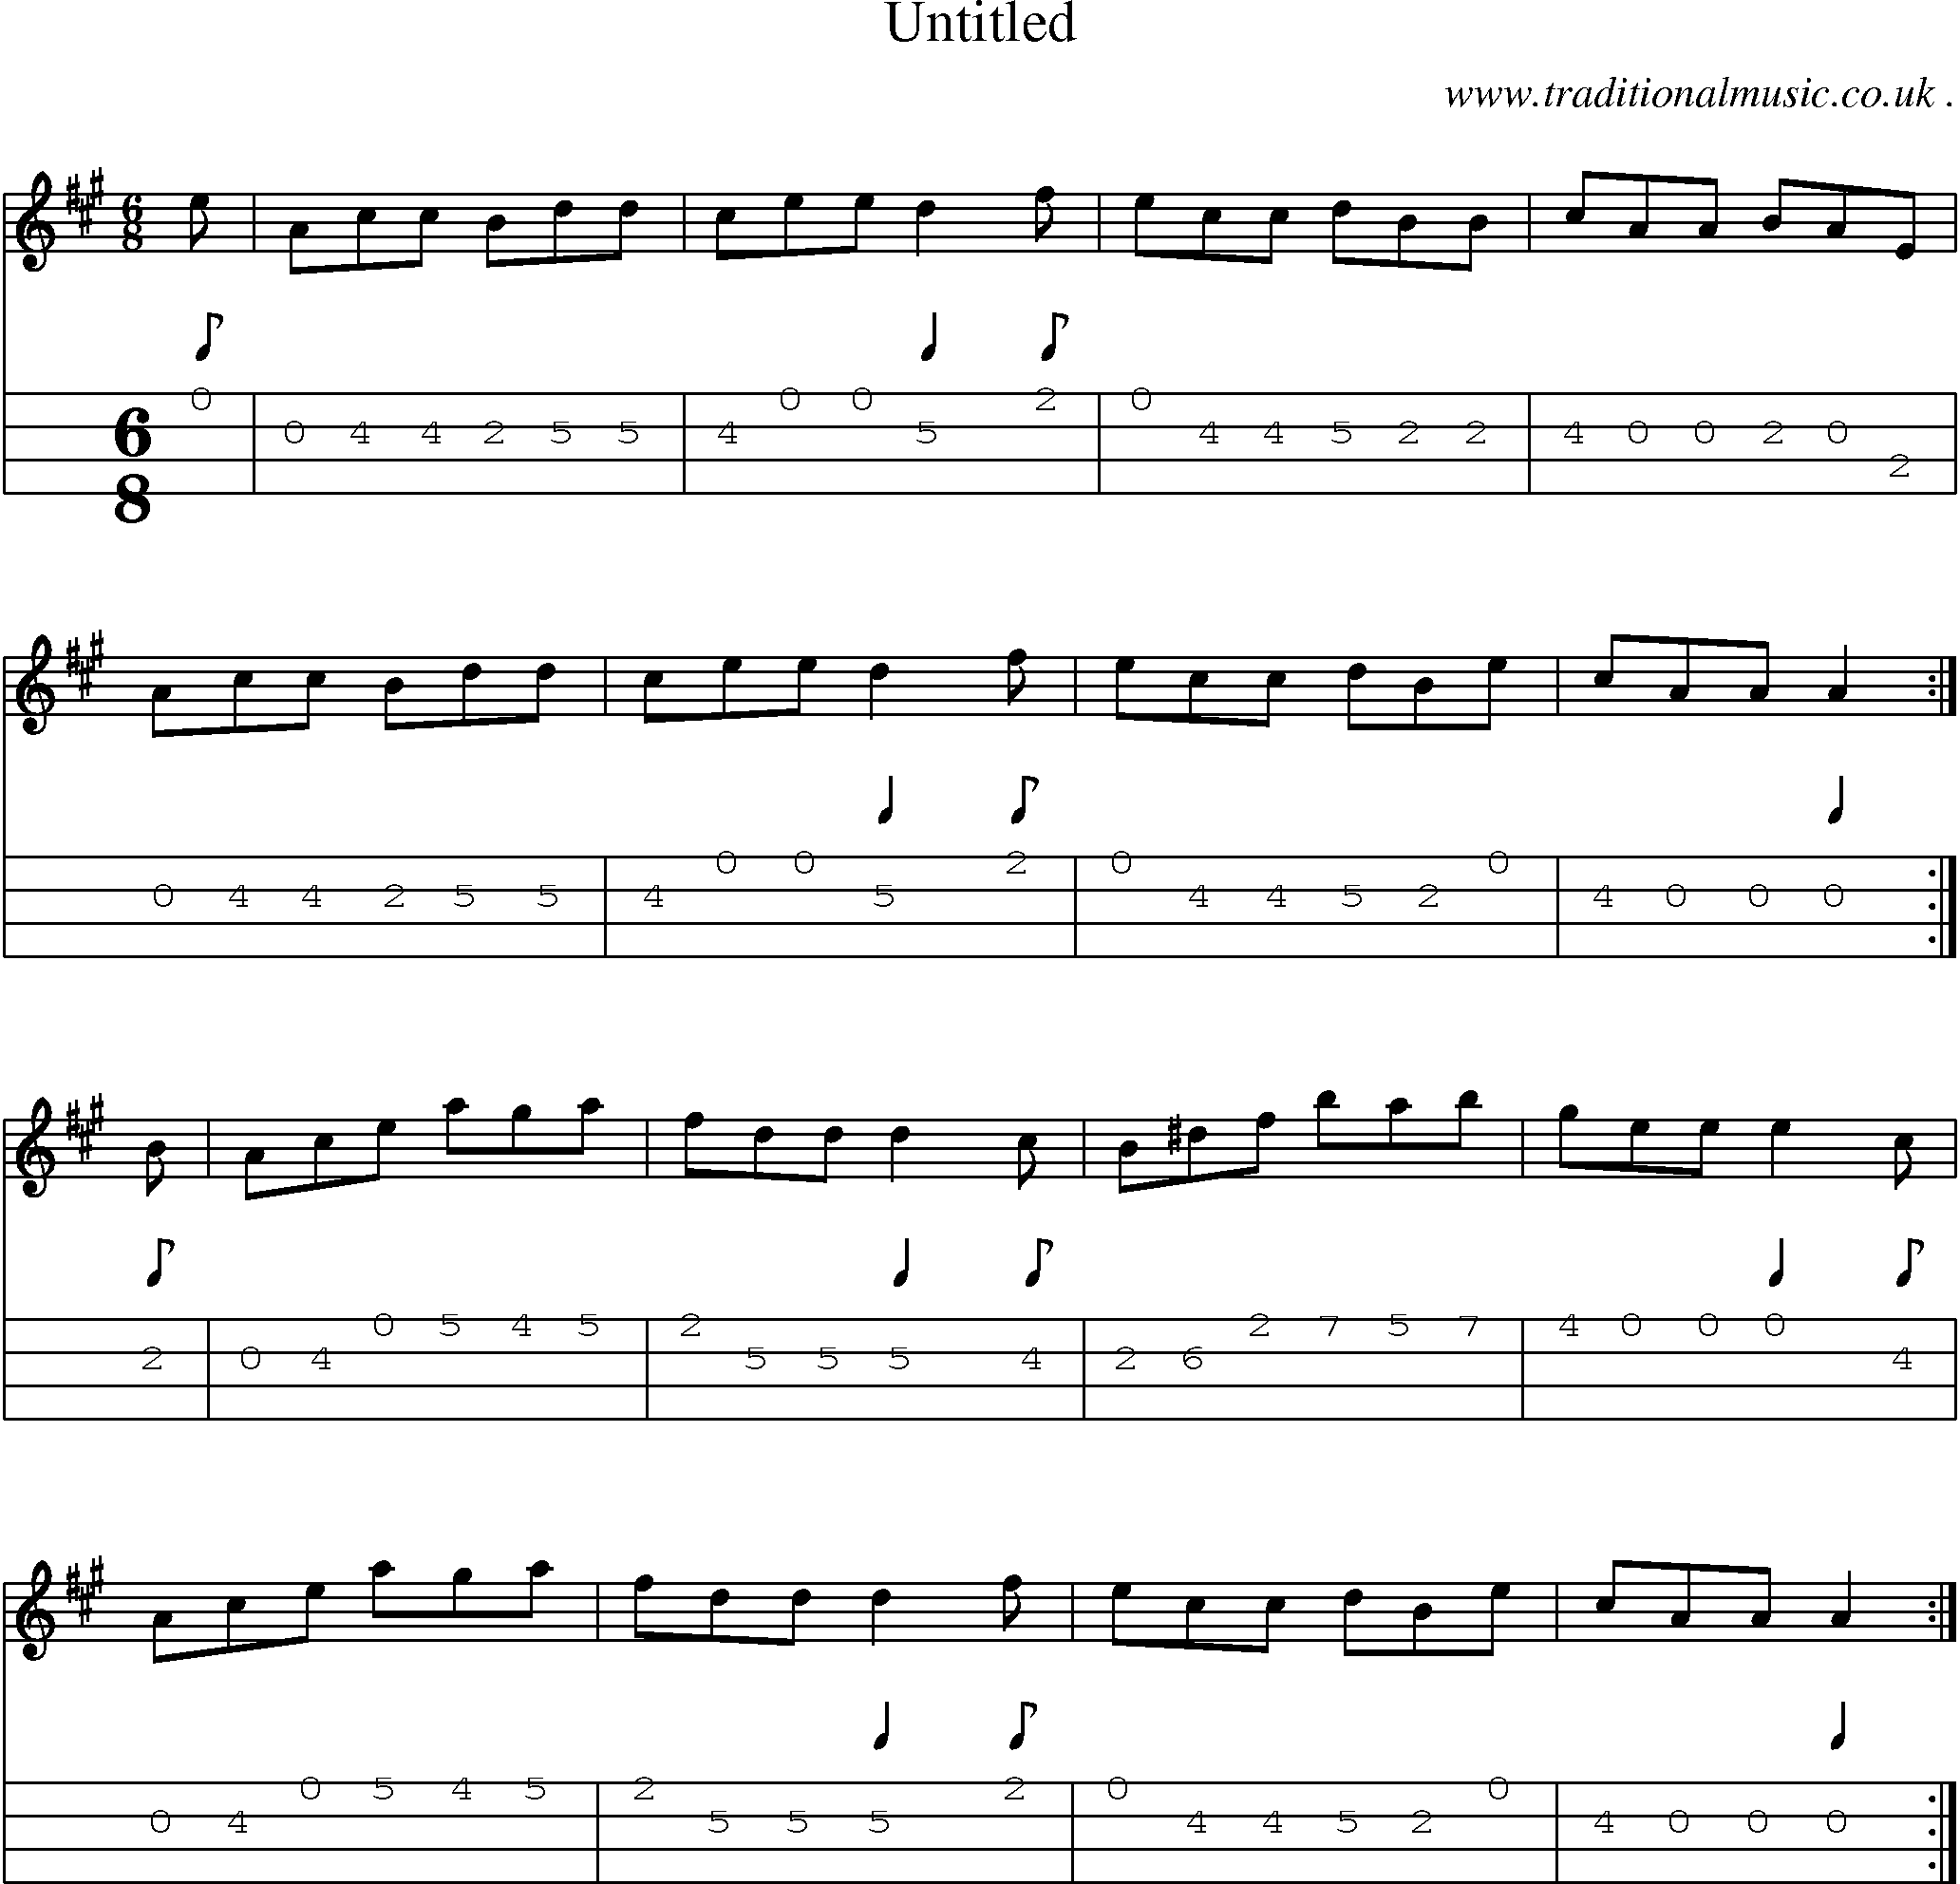 Sheet-music  score, Chords and Mandolin Tabs for Untitled